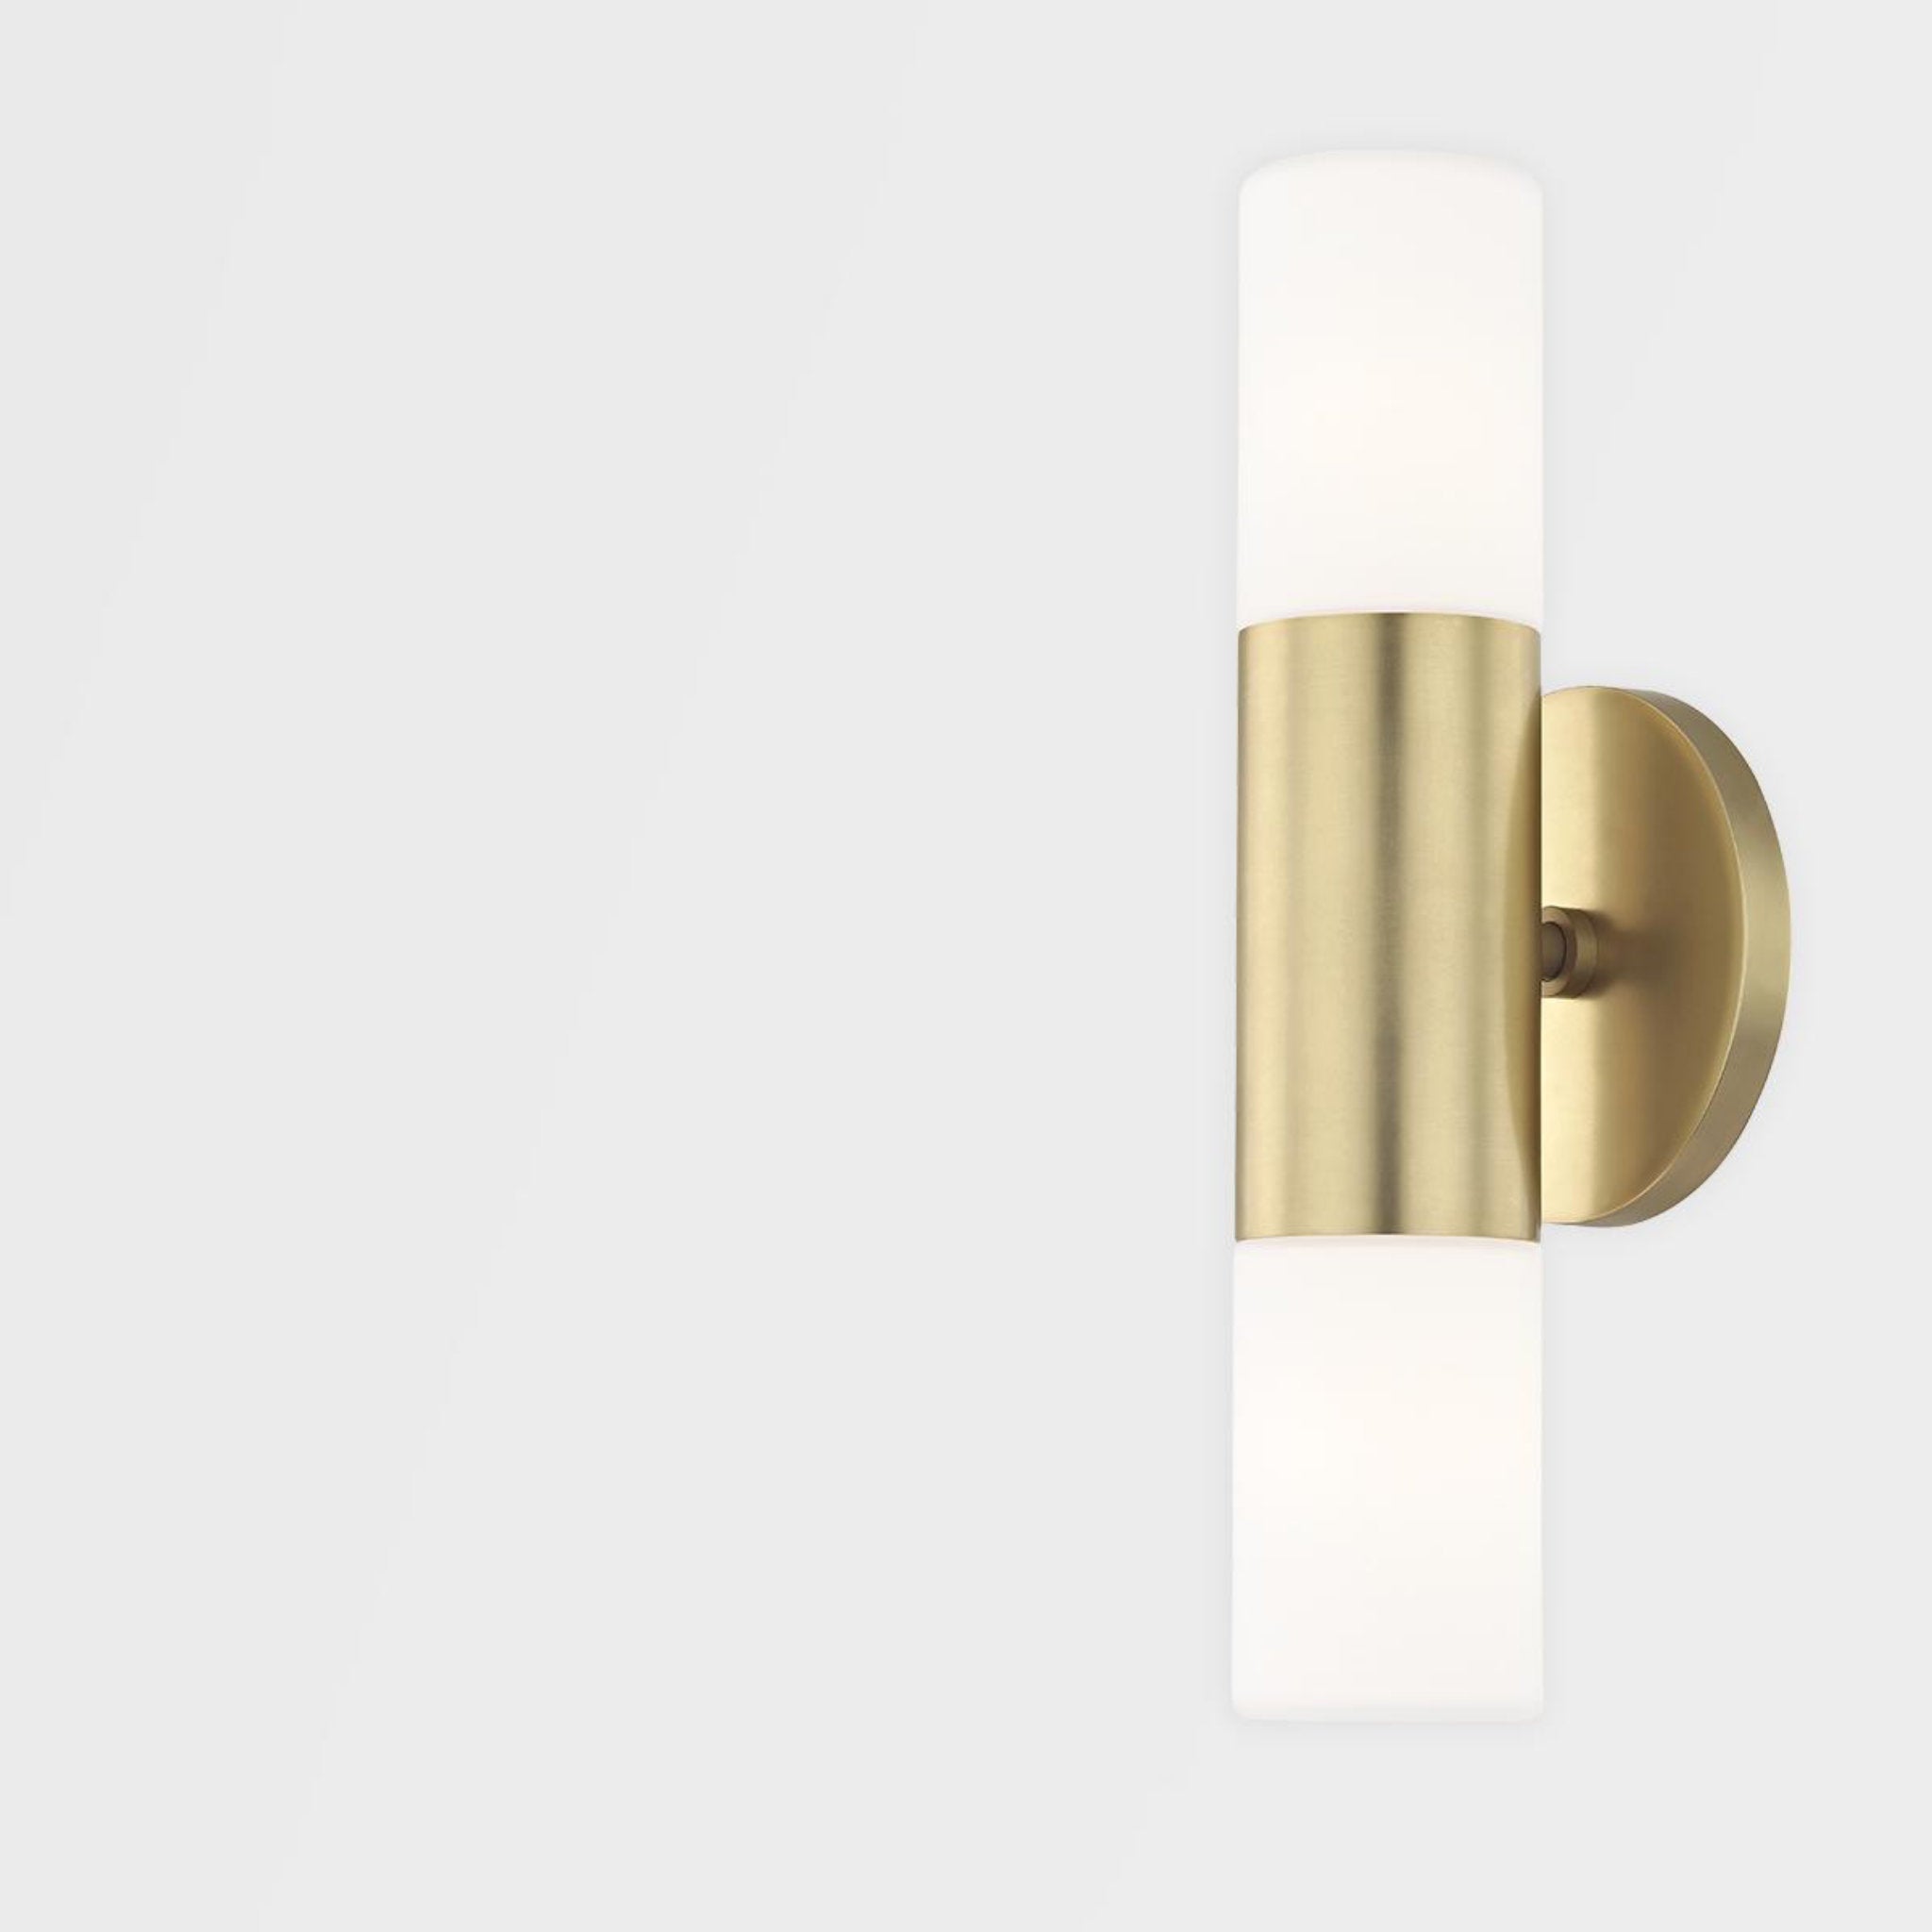 Lola 1-Light Wall Sconce in Aged Brass